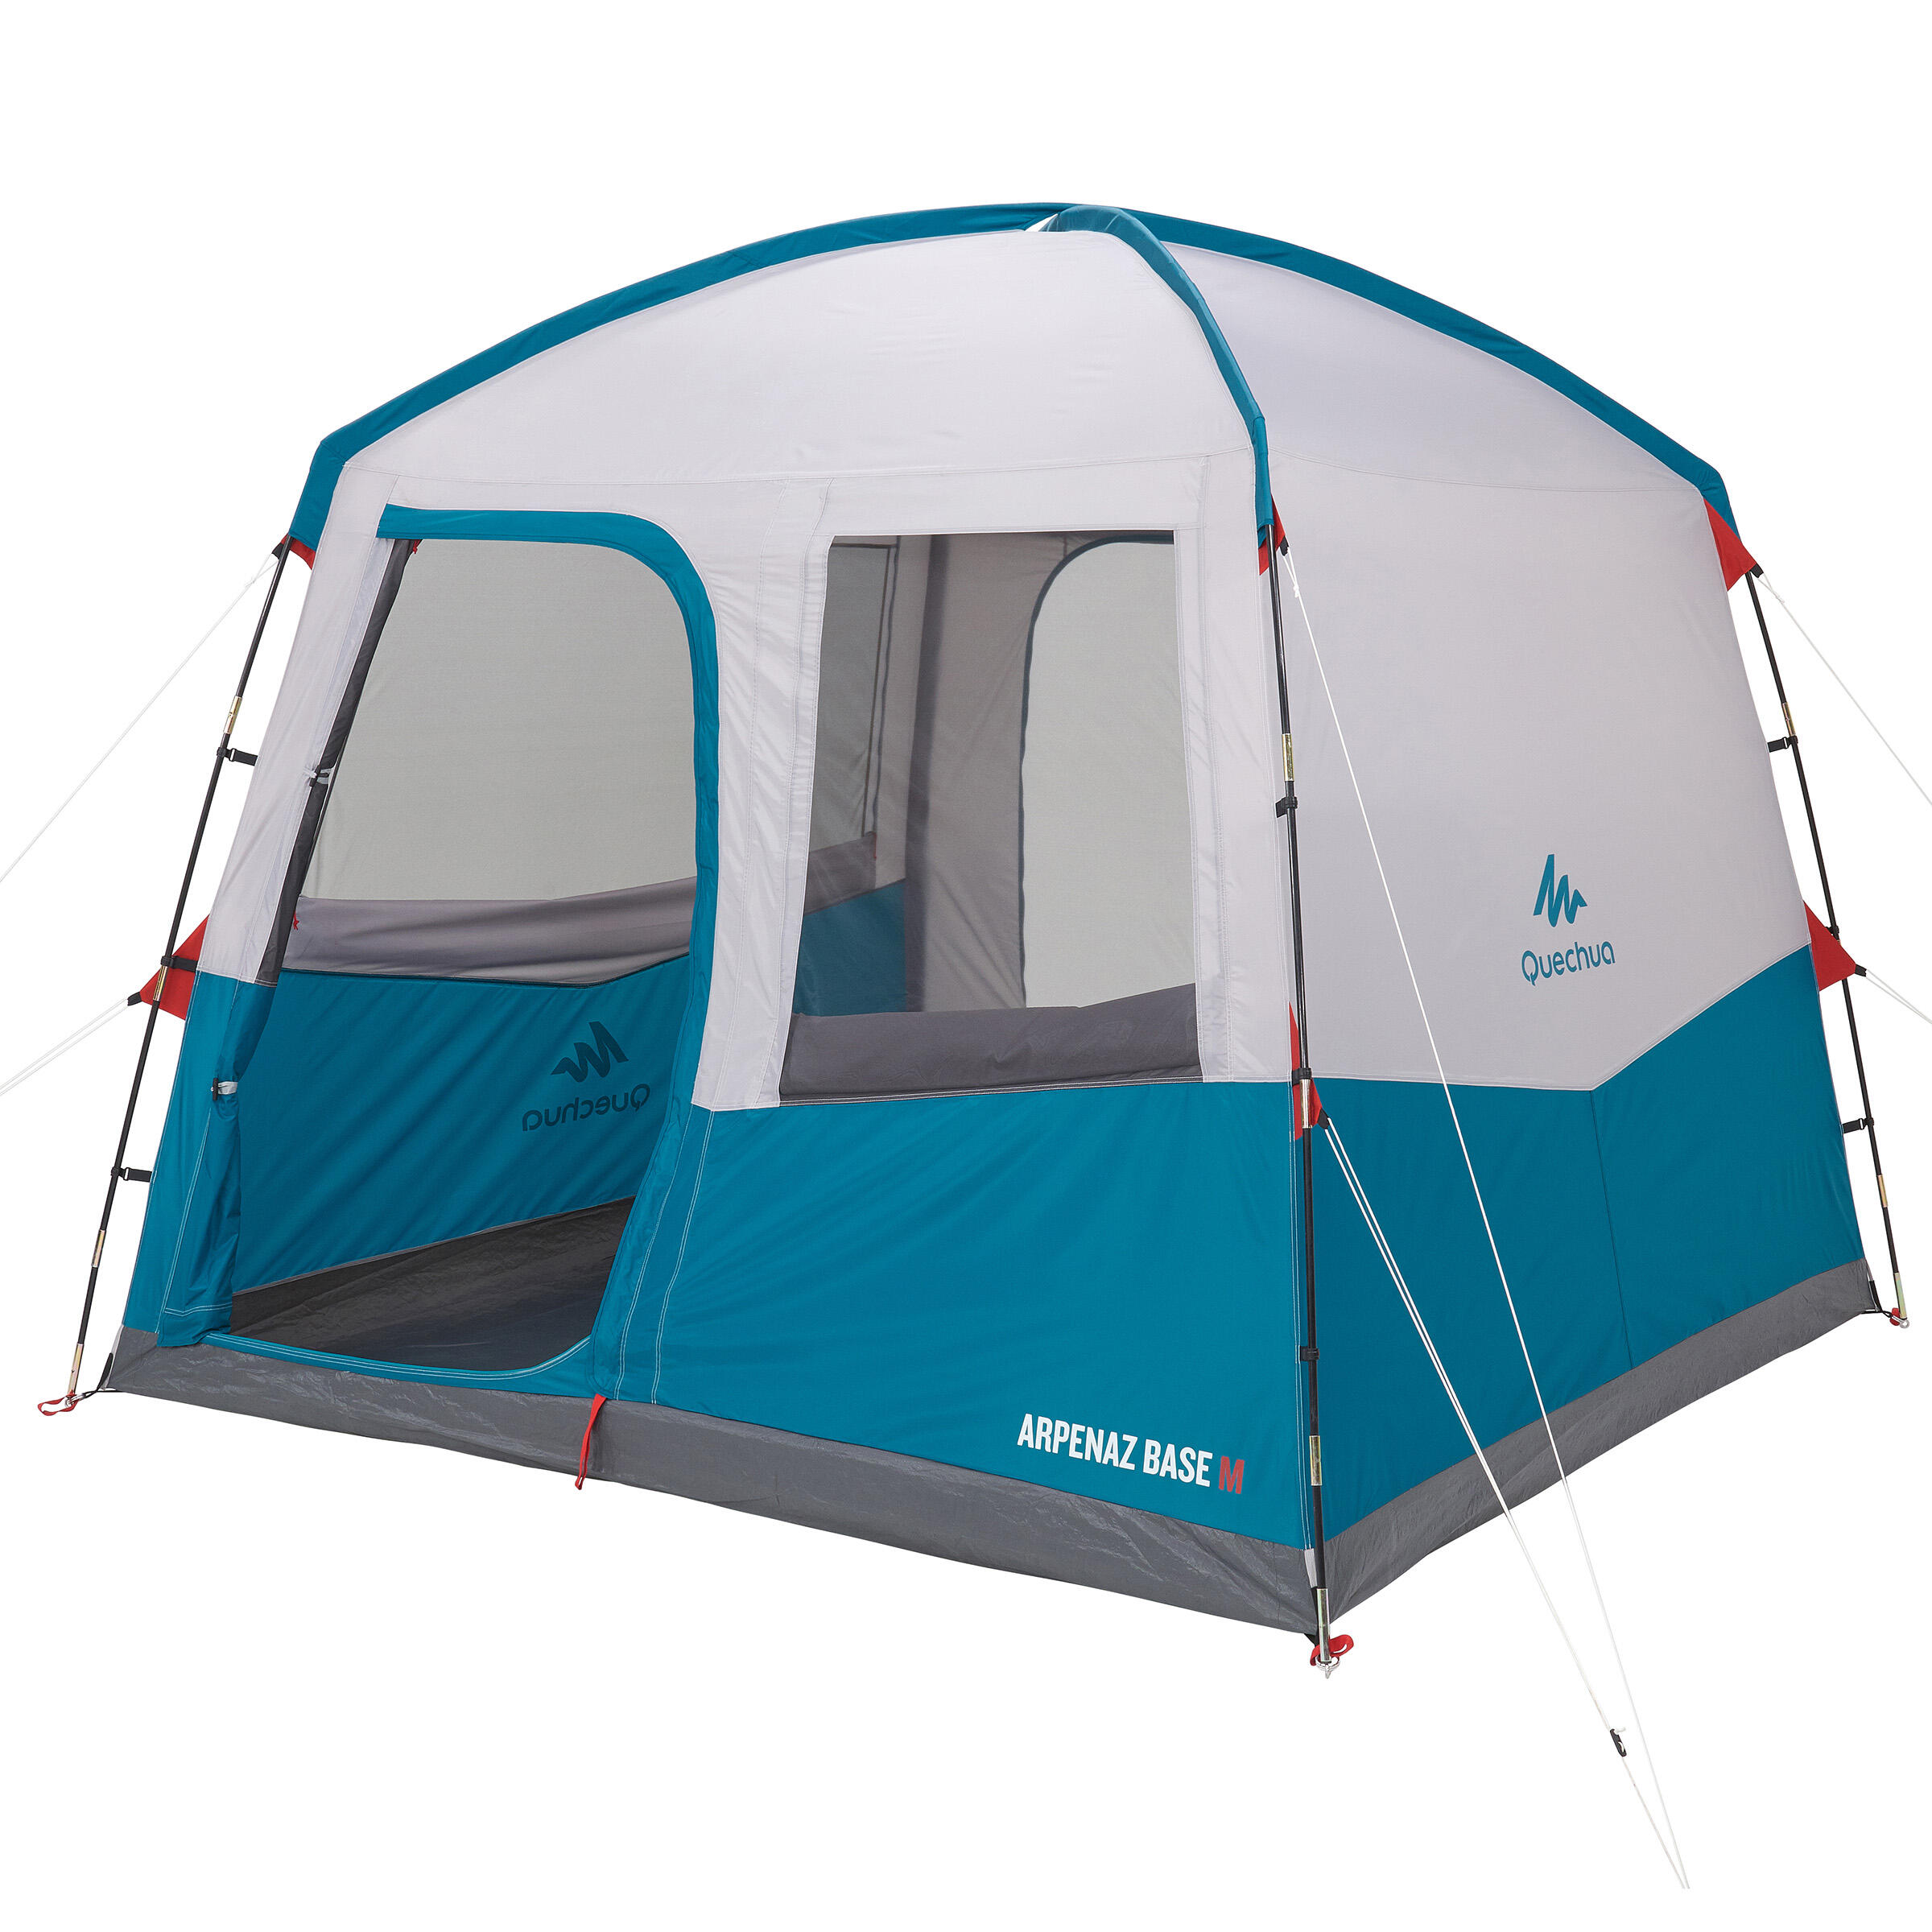 tents from decathlon